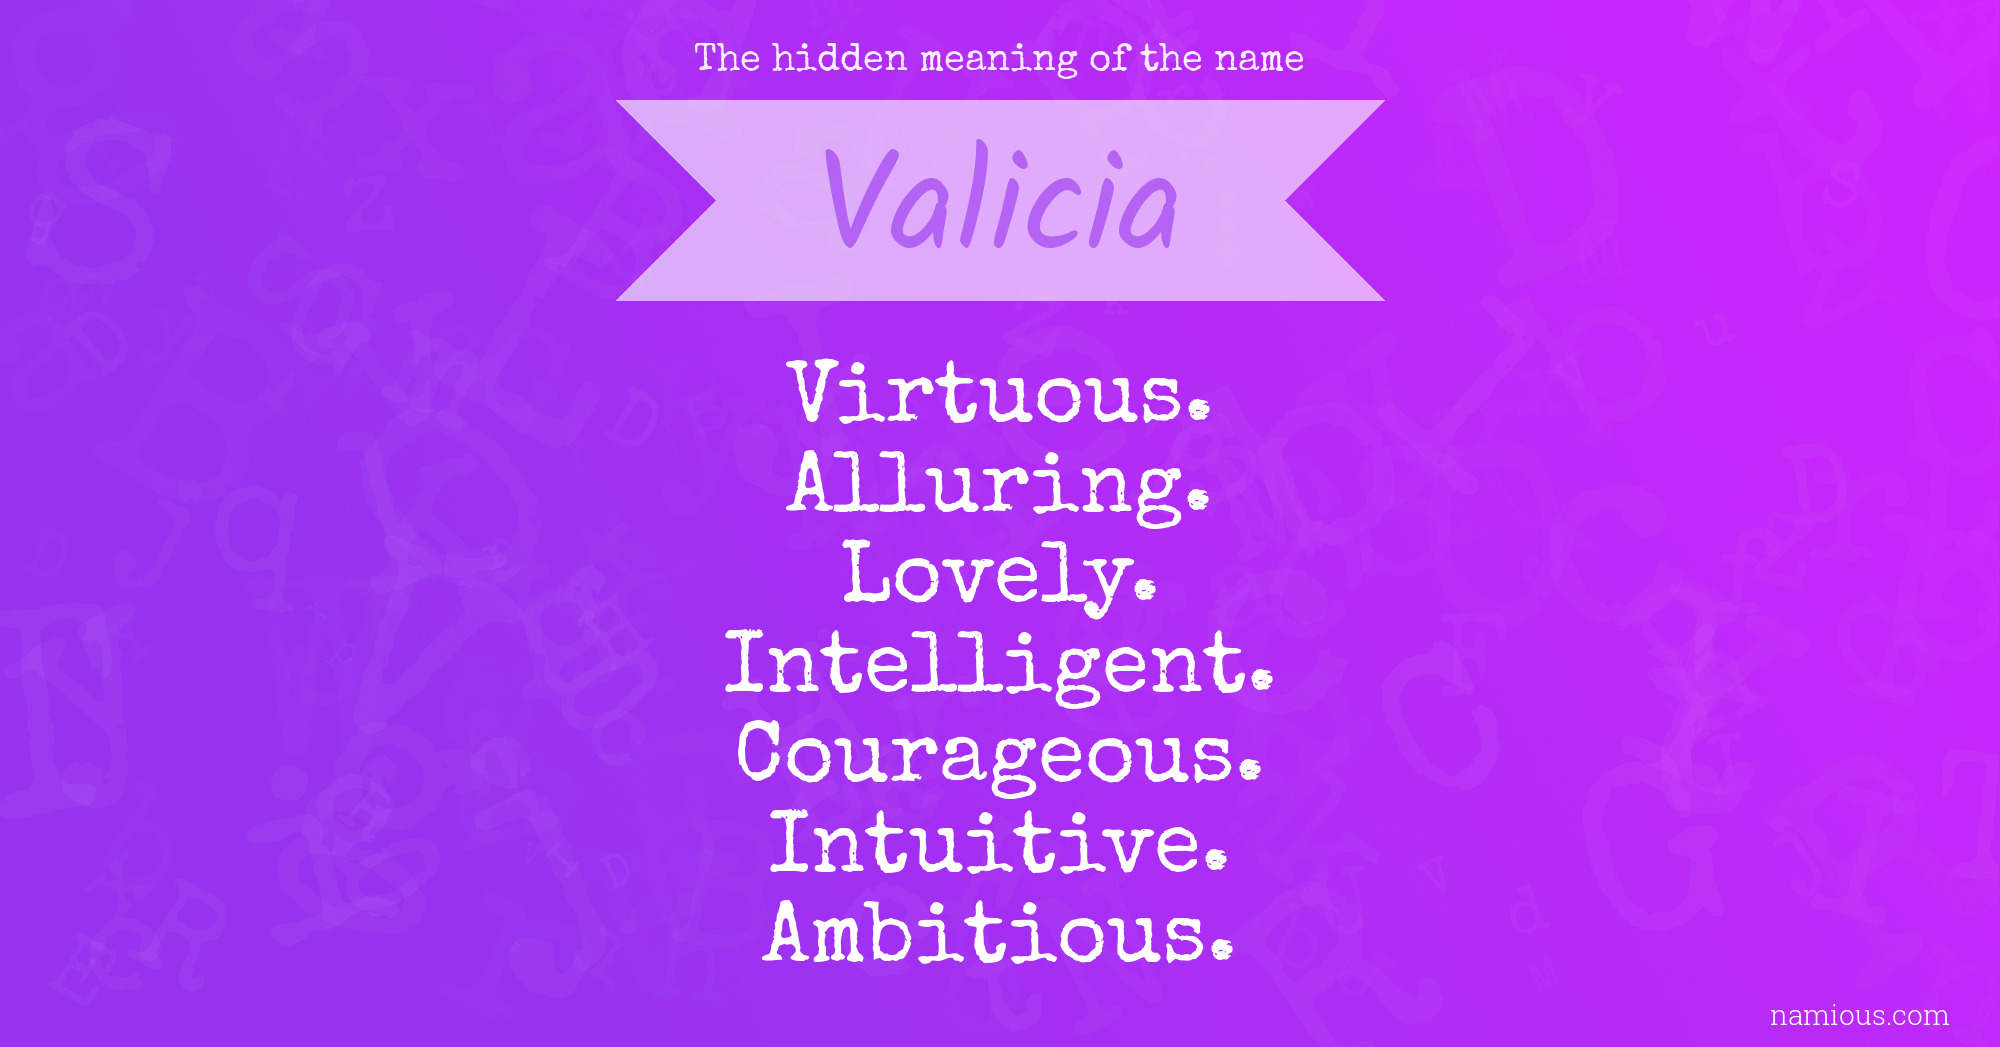 The hidden meaning of the name Valicia